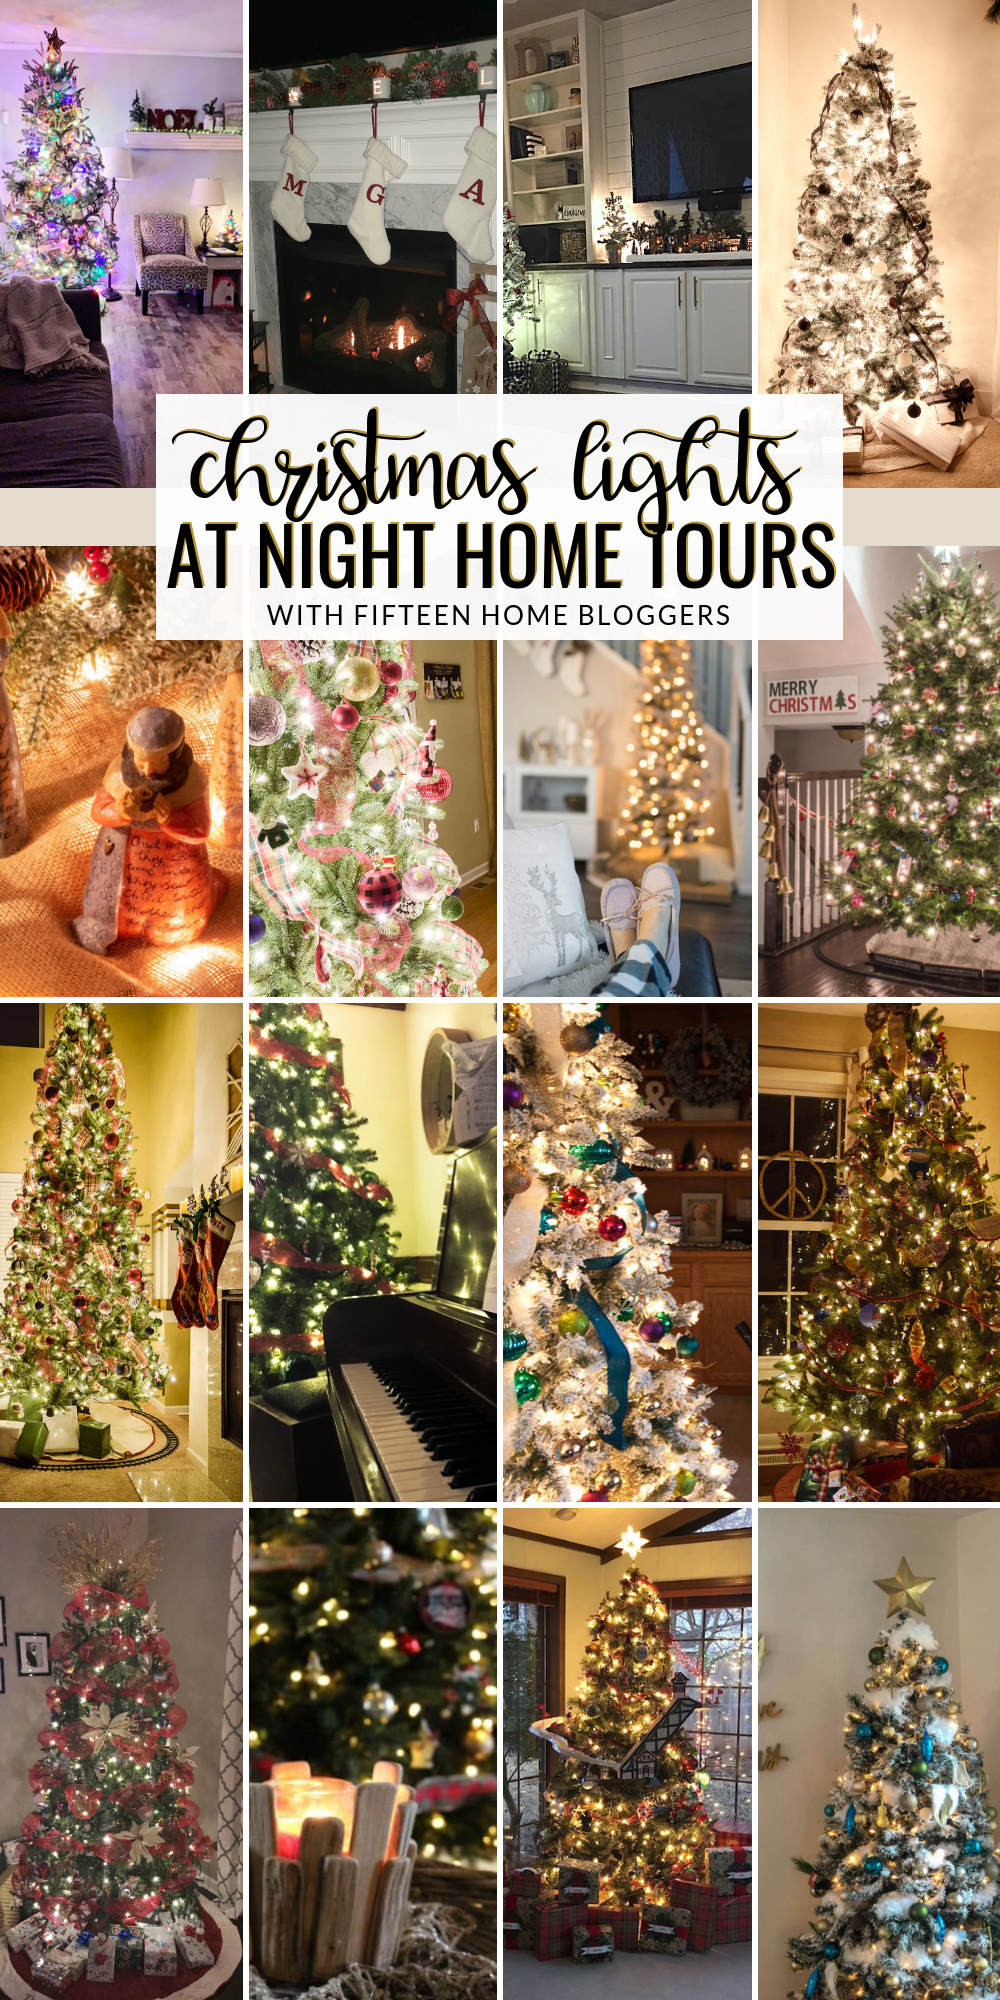 Tour our homes and see our Christmas Lights Home Tours! Christmas trees, lights, and home decor